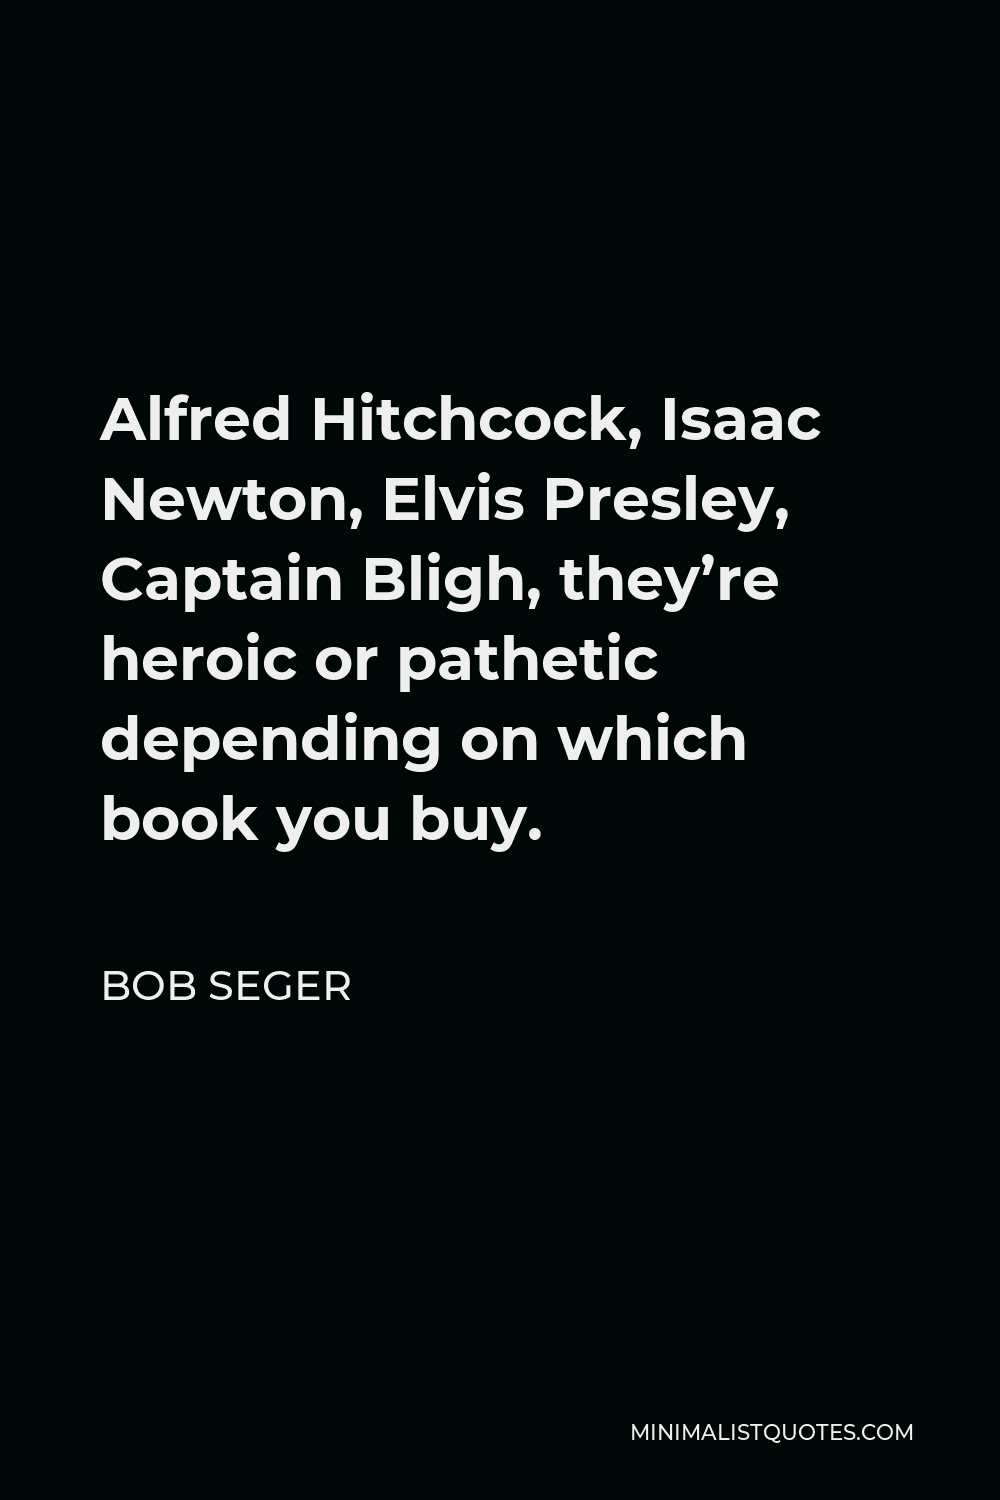 Bob Seger Quote - Alfred Hitchcock, Isaac Newton, Elvis Presley, Captain Bligh, they’re heroic or pathetic depending on which book you buy.